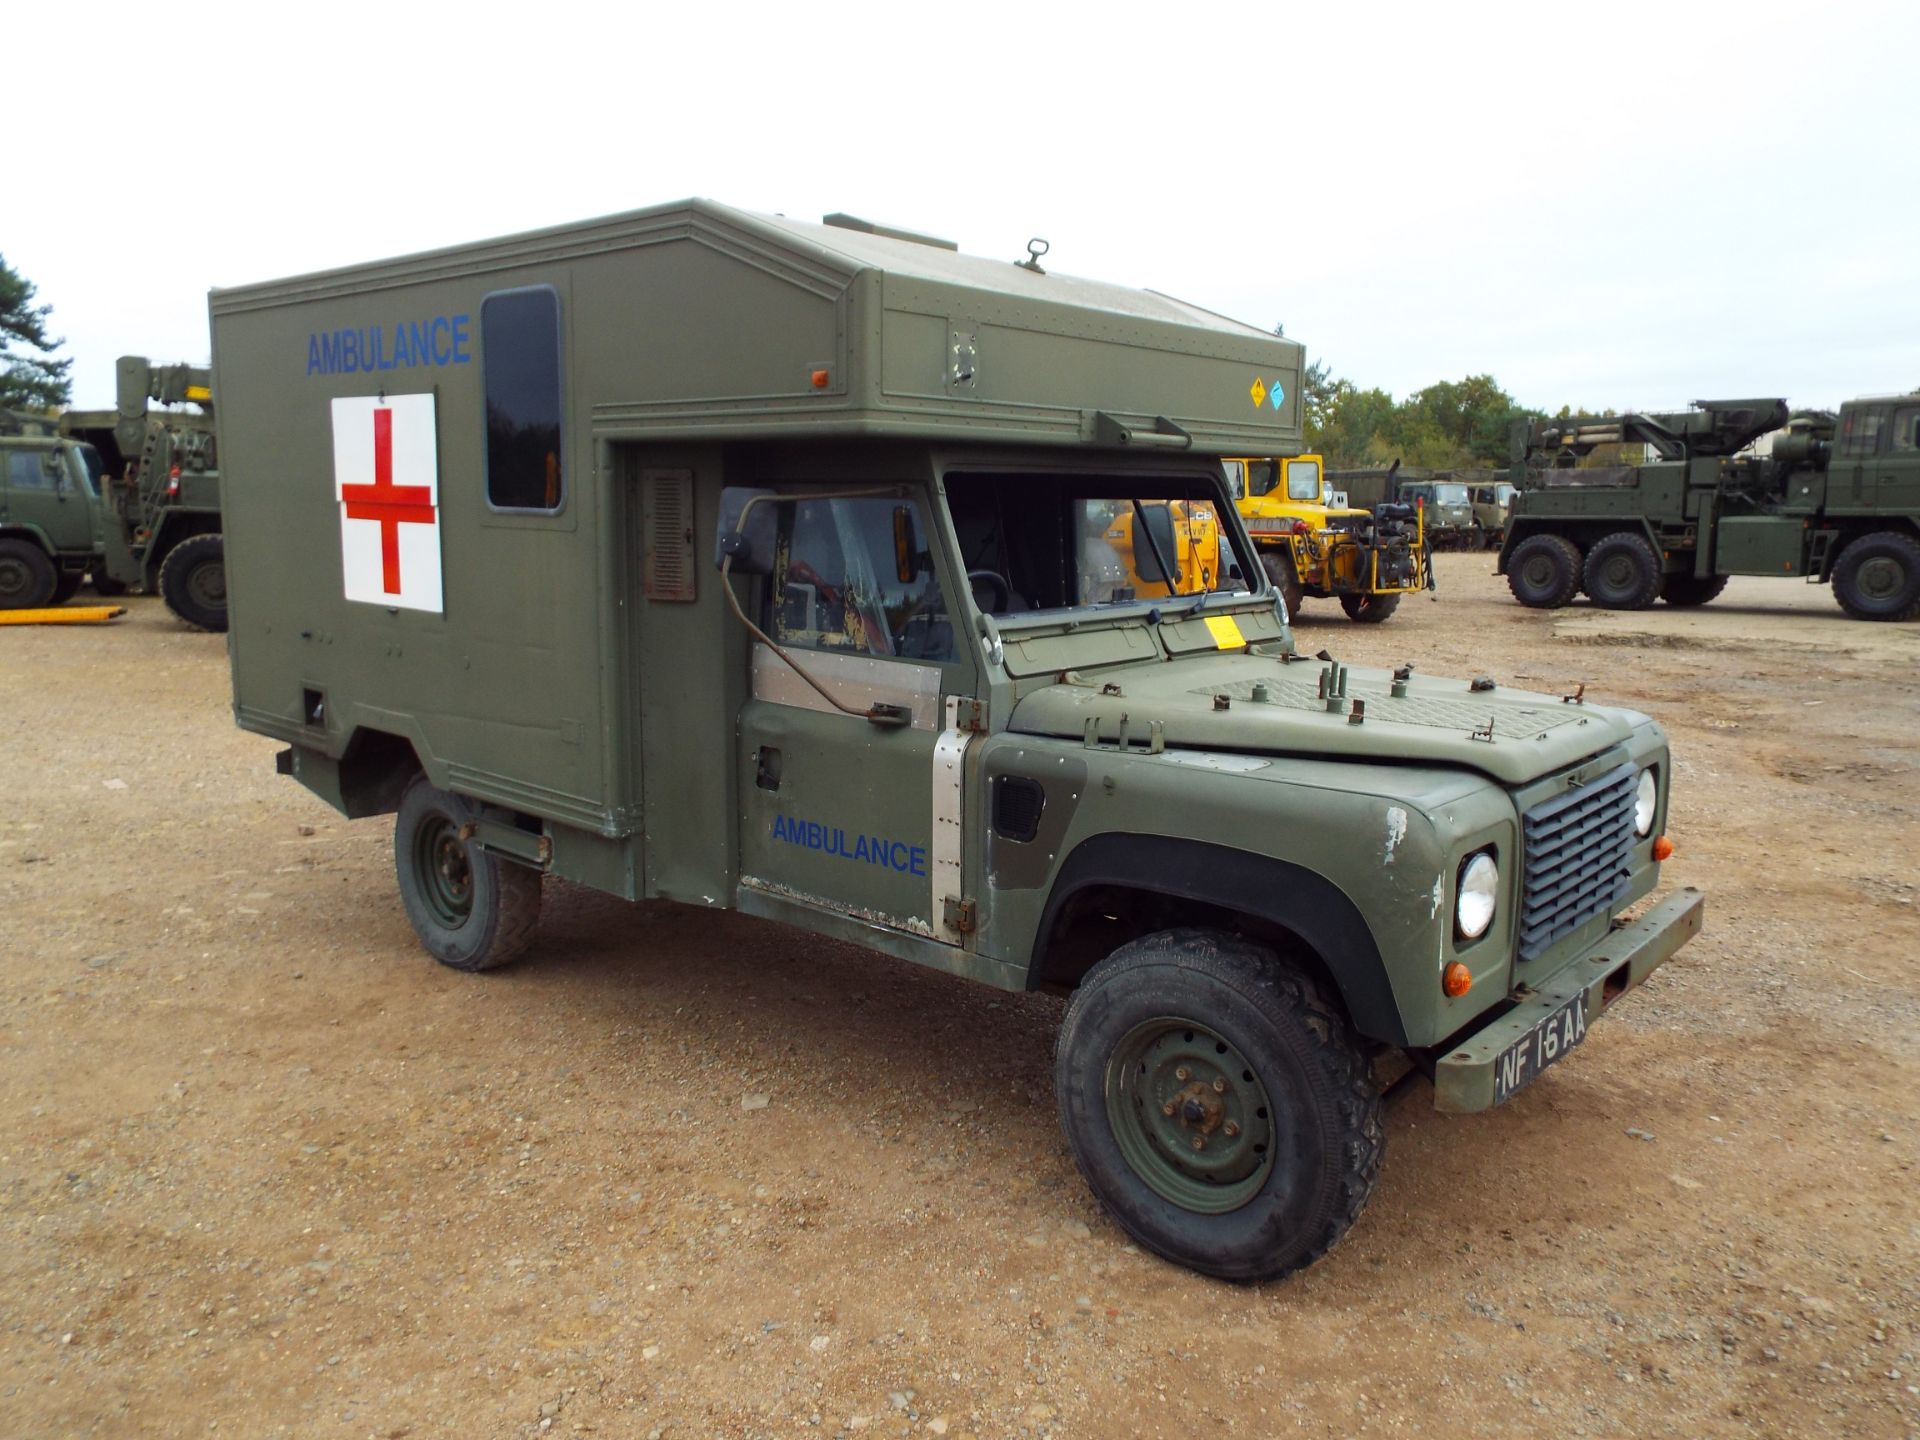 Military Specification Land Rover Wolf 130 ambulance